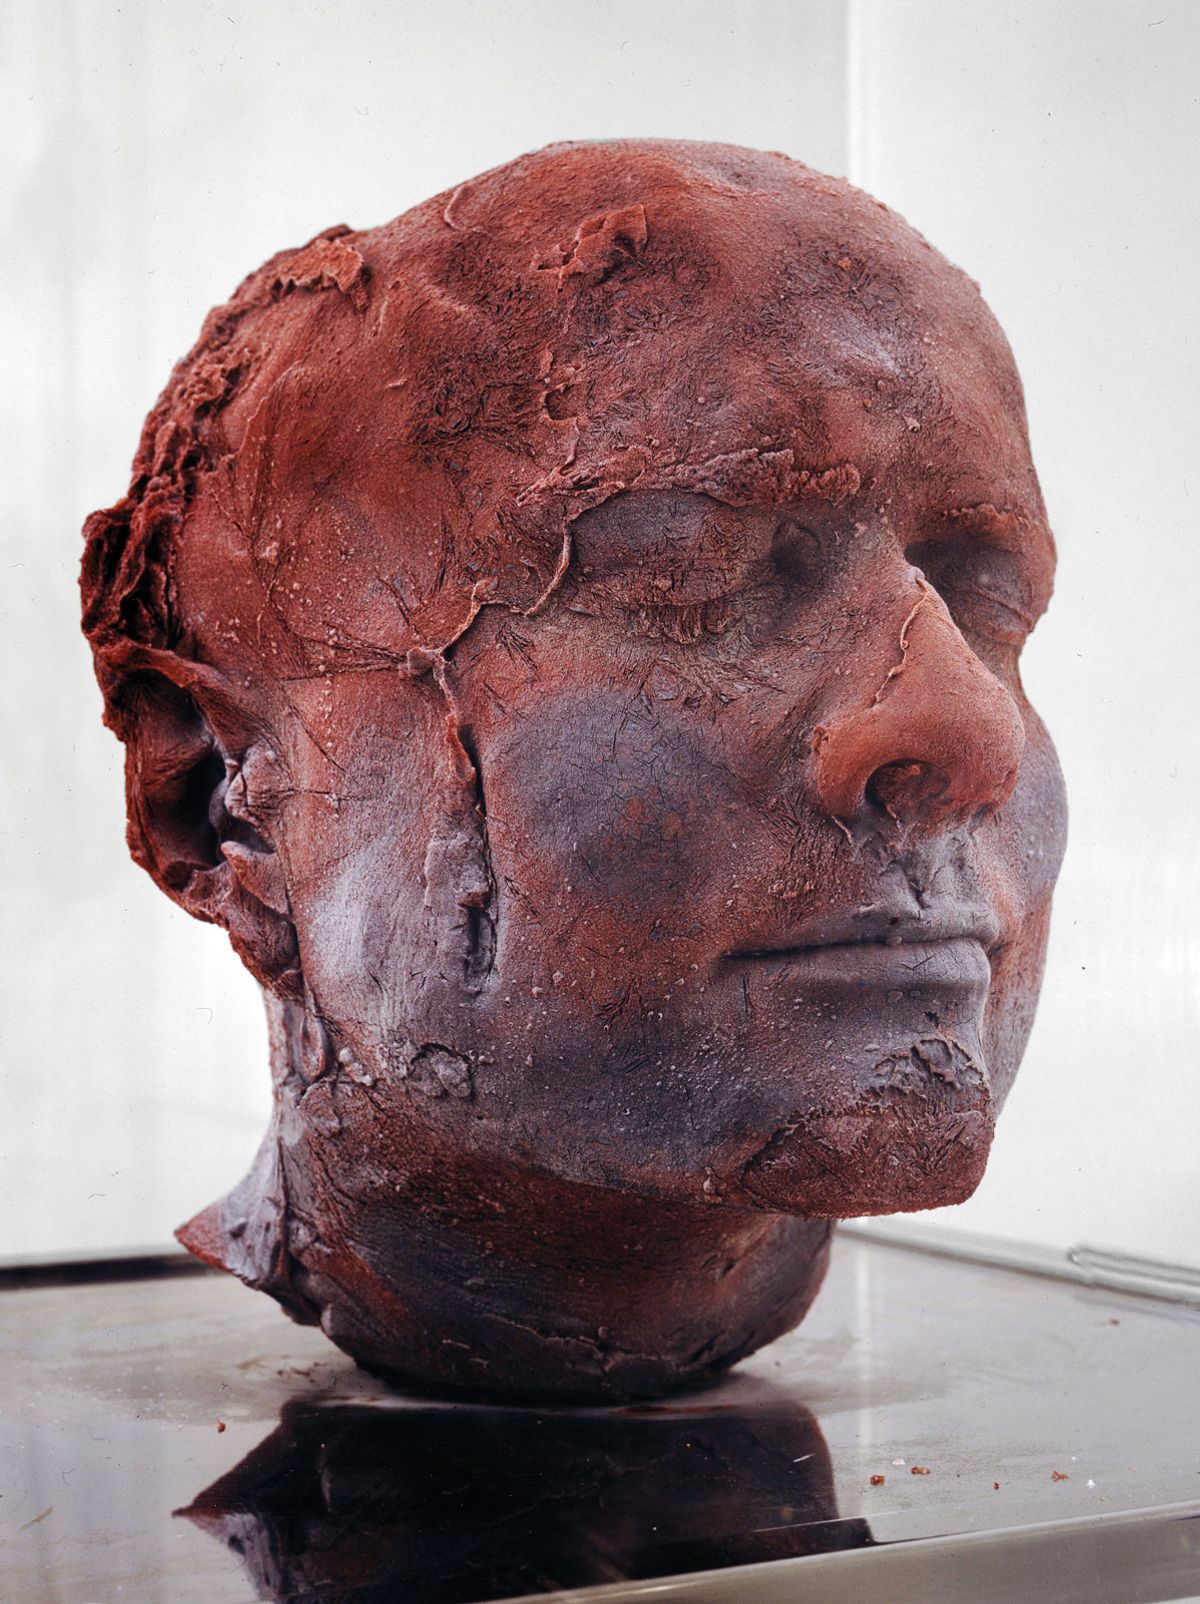 Self (1991) by Marc Quinn, who used ten pints of his own blood to create the work Marc Quinn Studio, Courtesy Marc Quinn studio